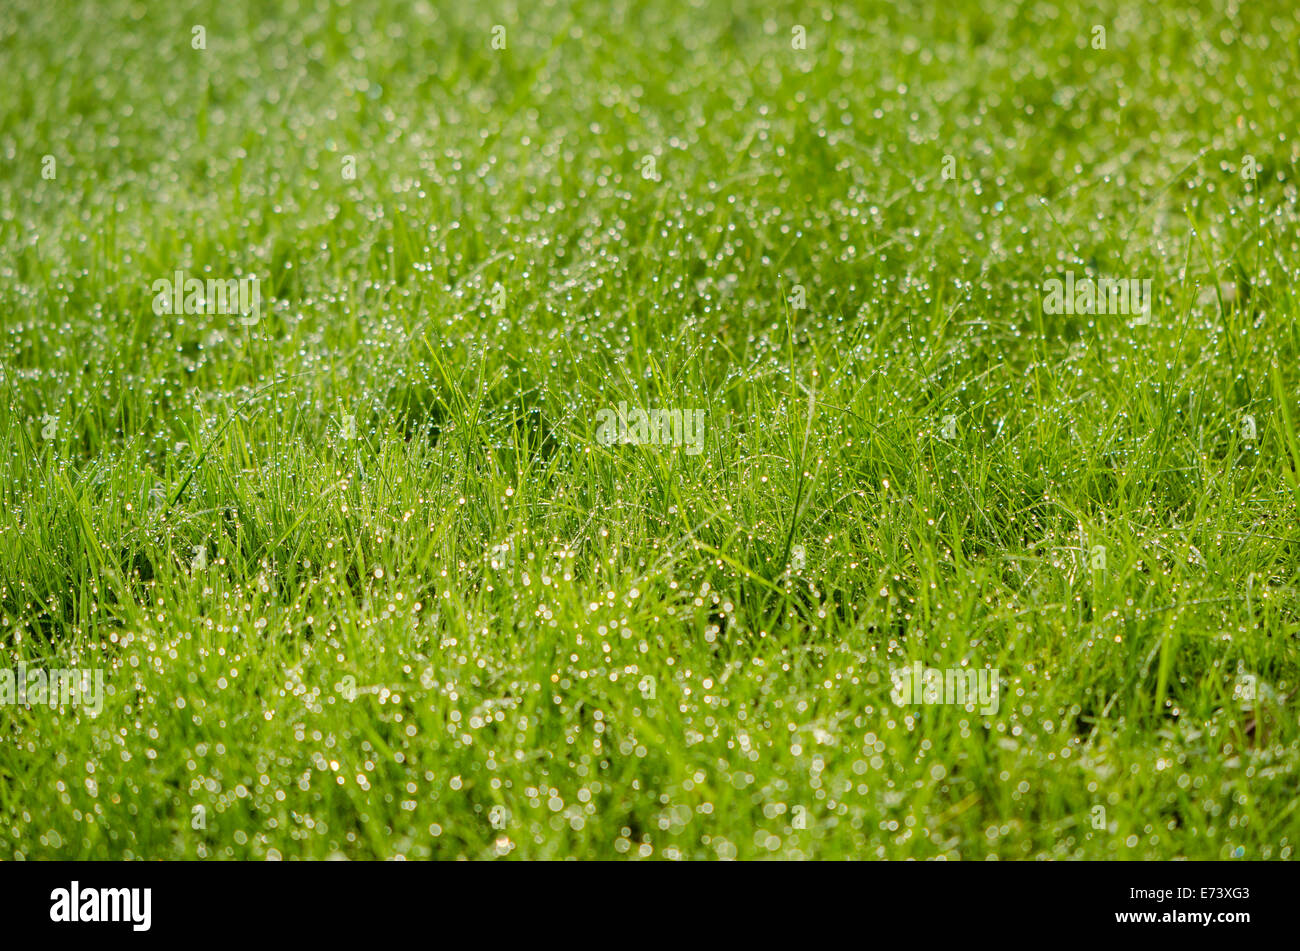 close up of green grass yard with many small dew drops in the early morning Stock Photo